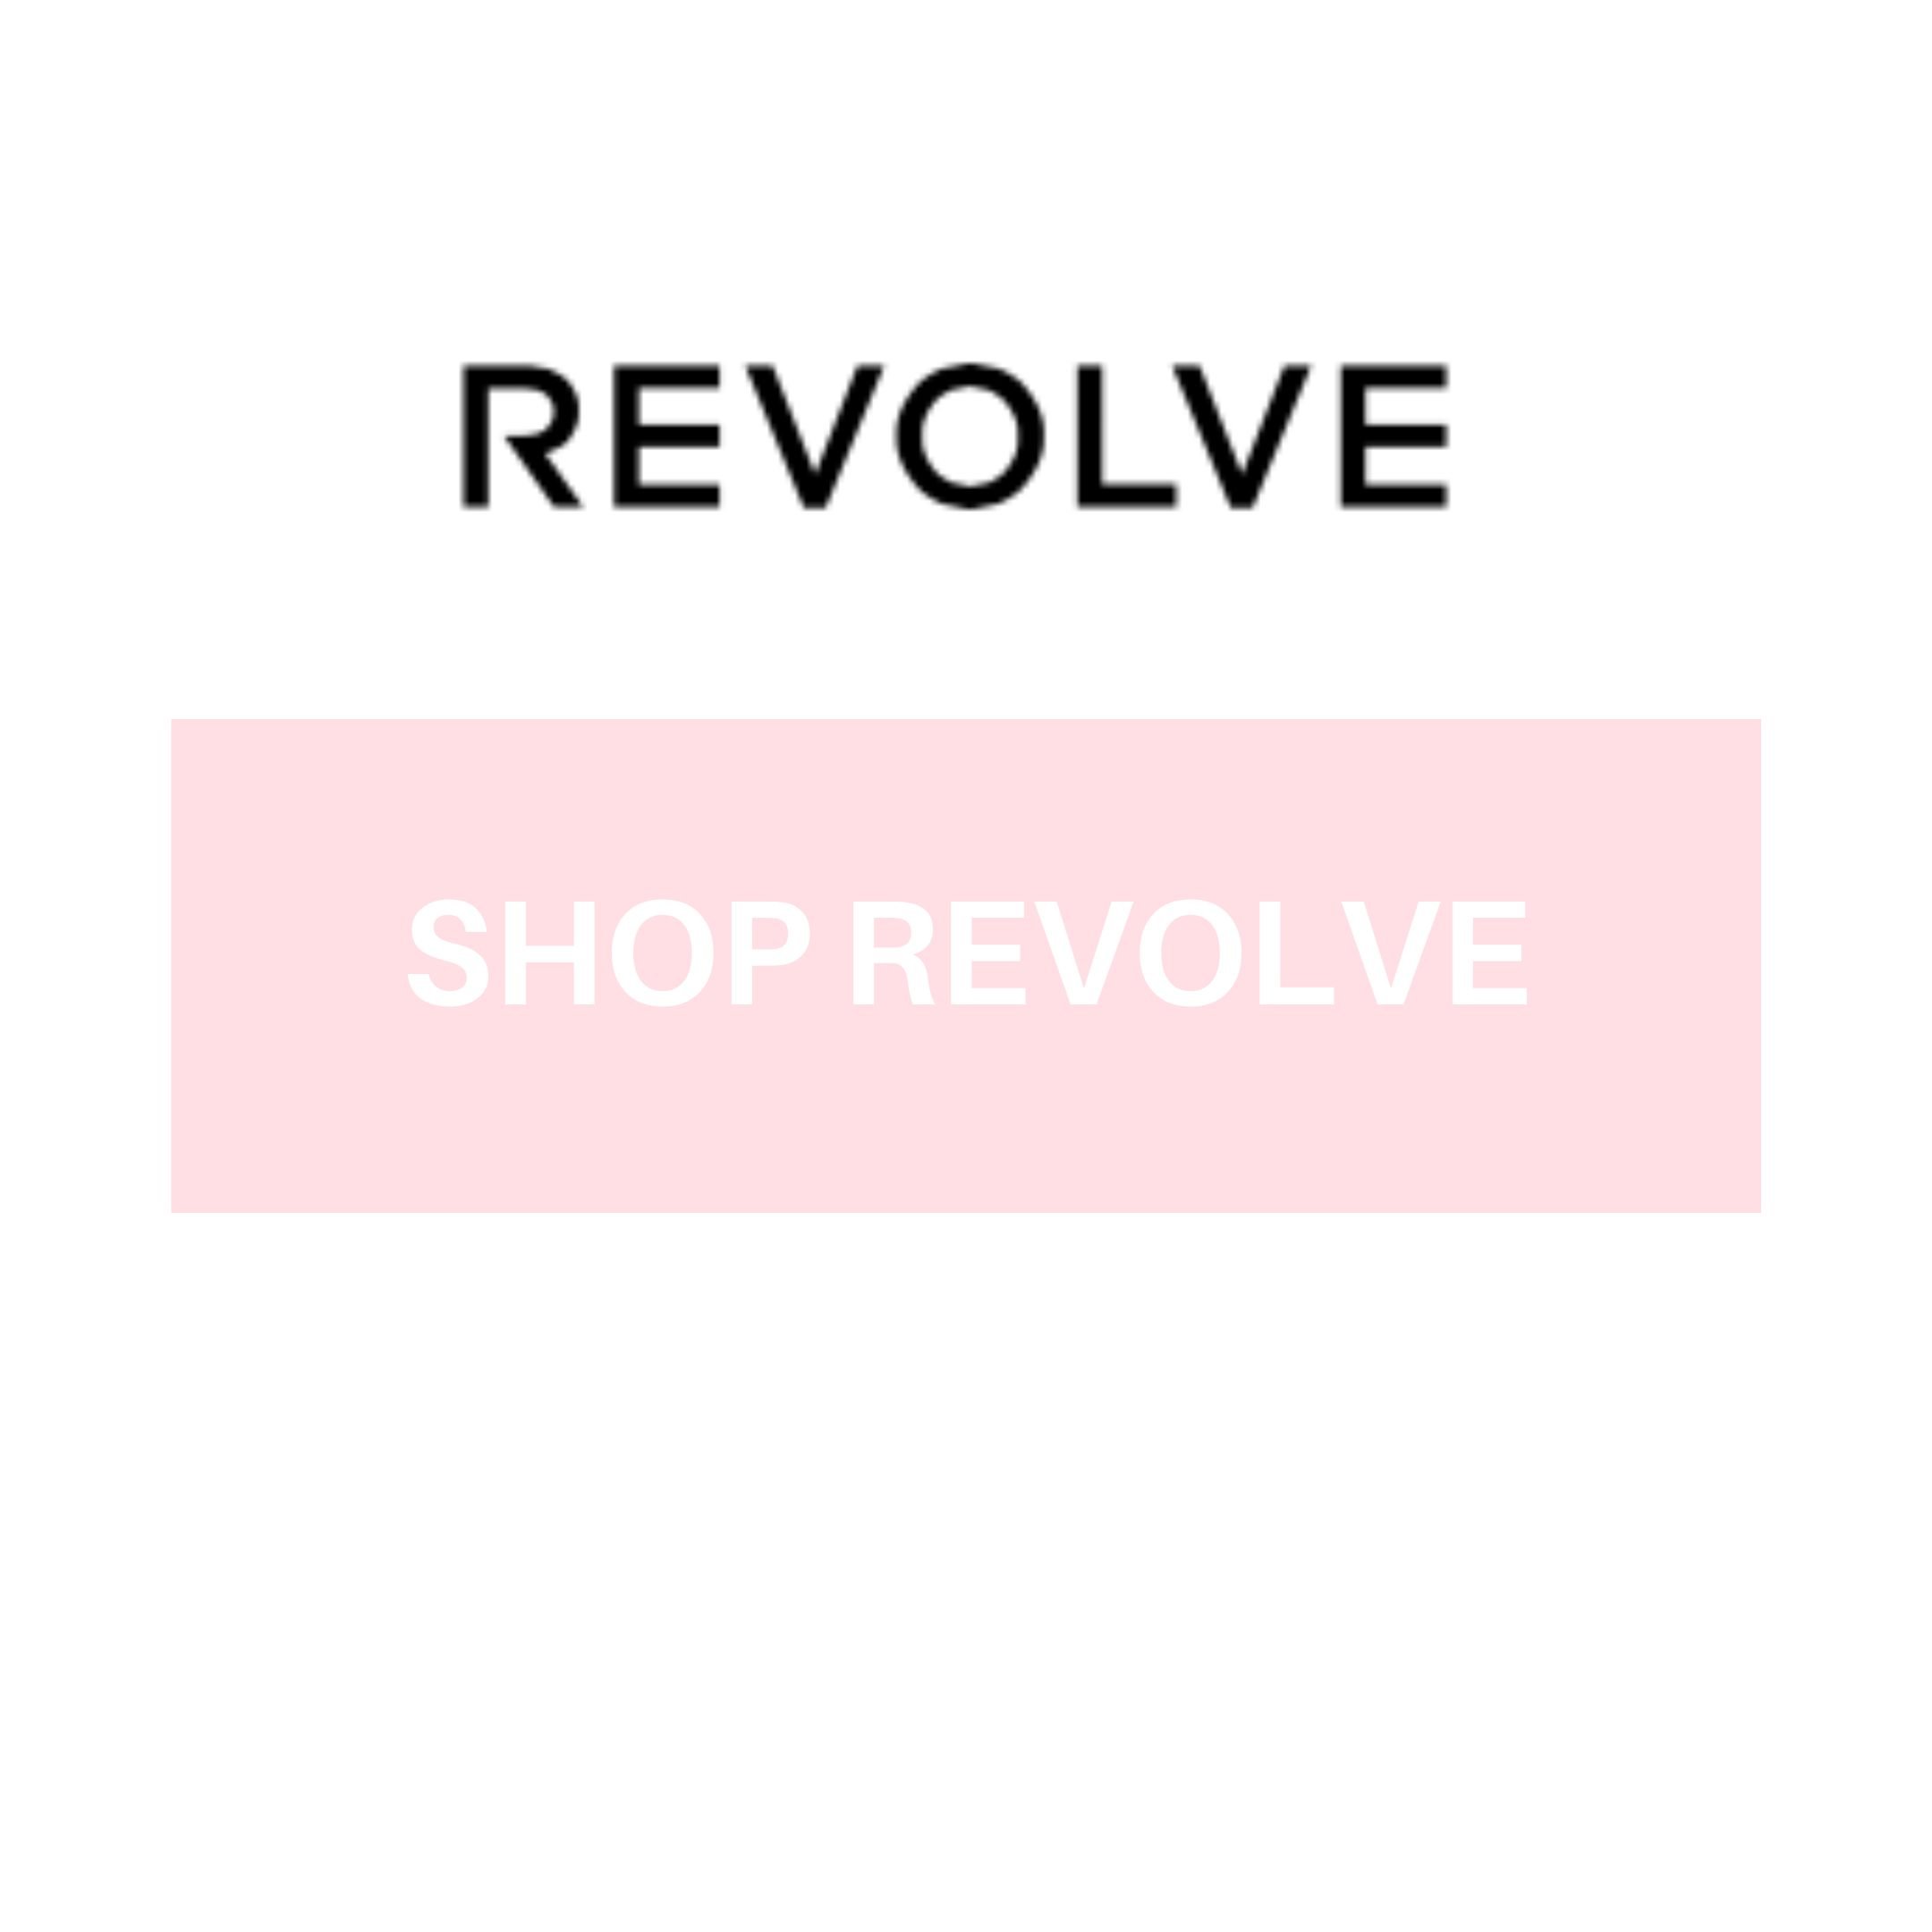 Click to shop my Revolve favorites!